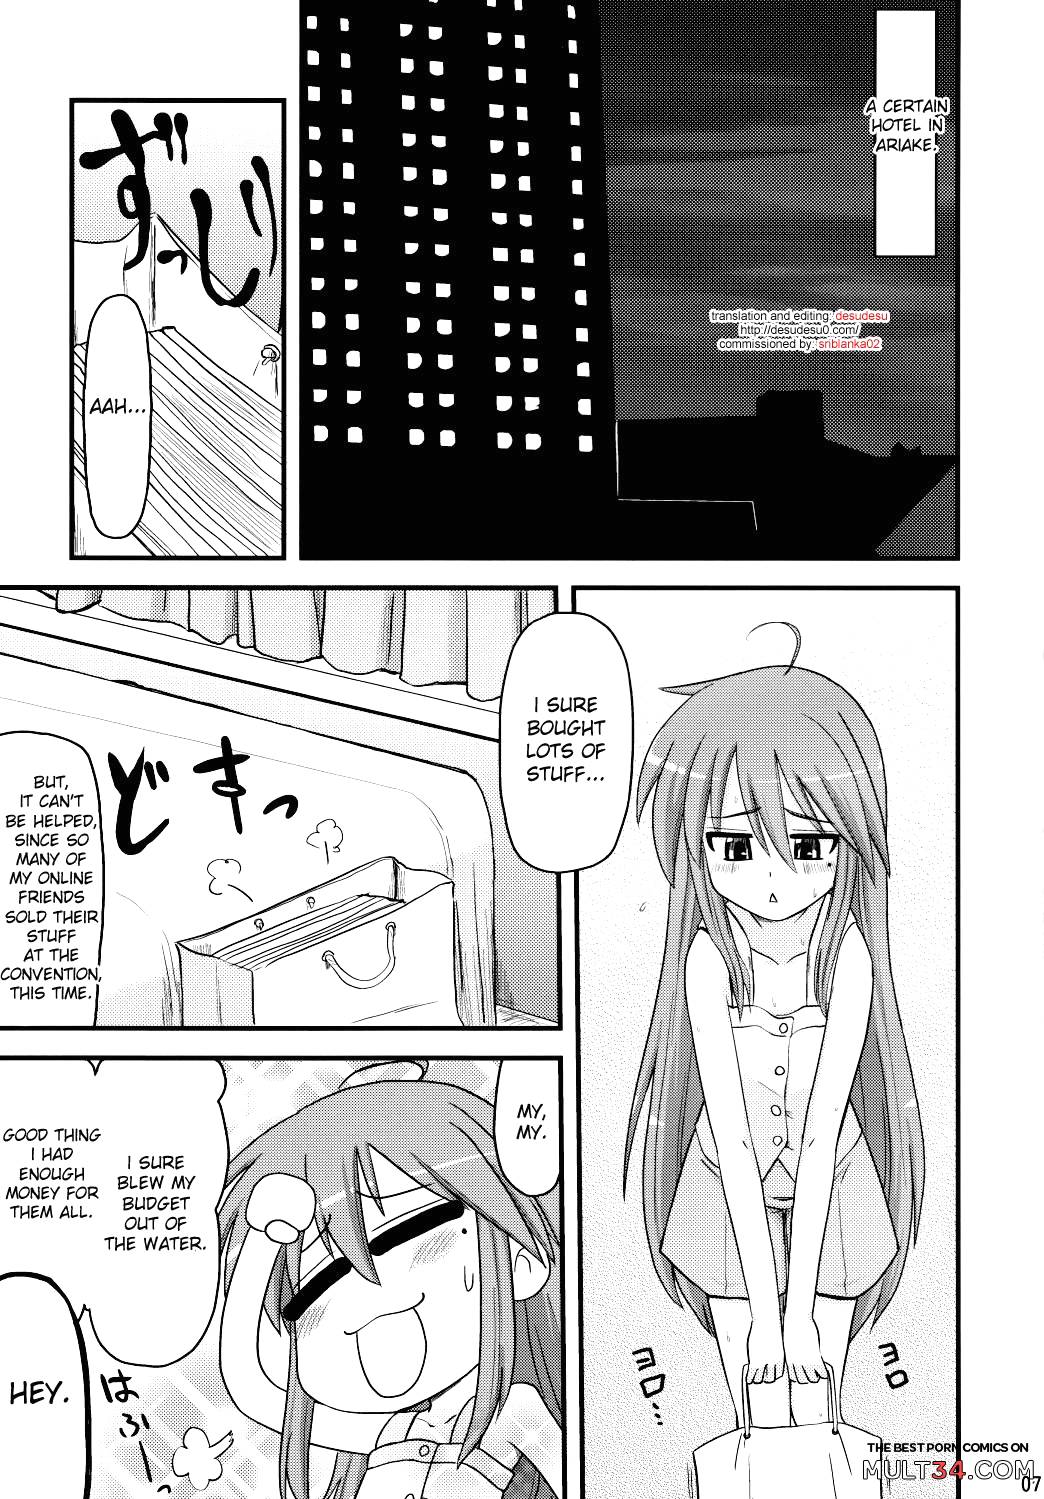 Konata and Oh-zu 4 people each and every one + 1 page 3